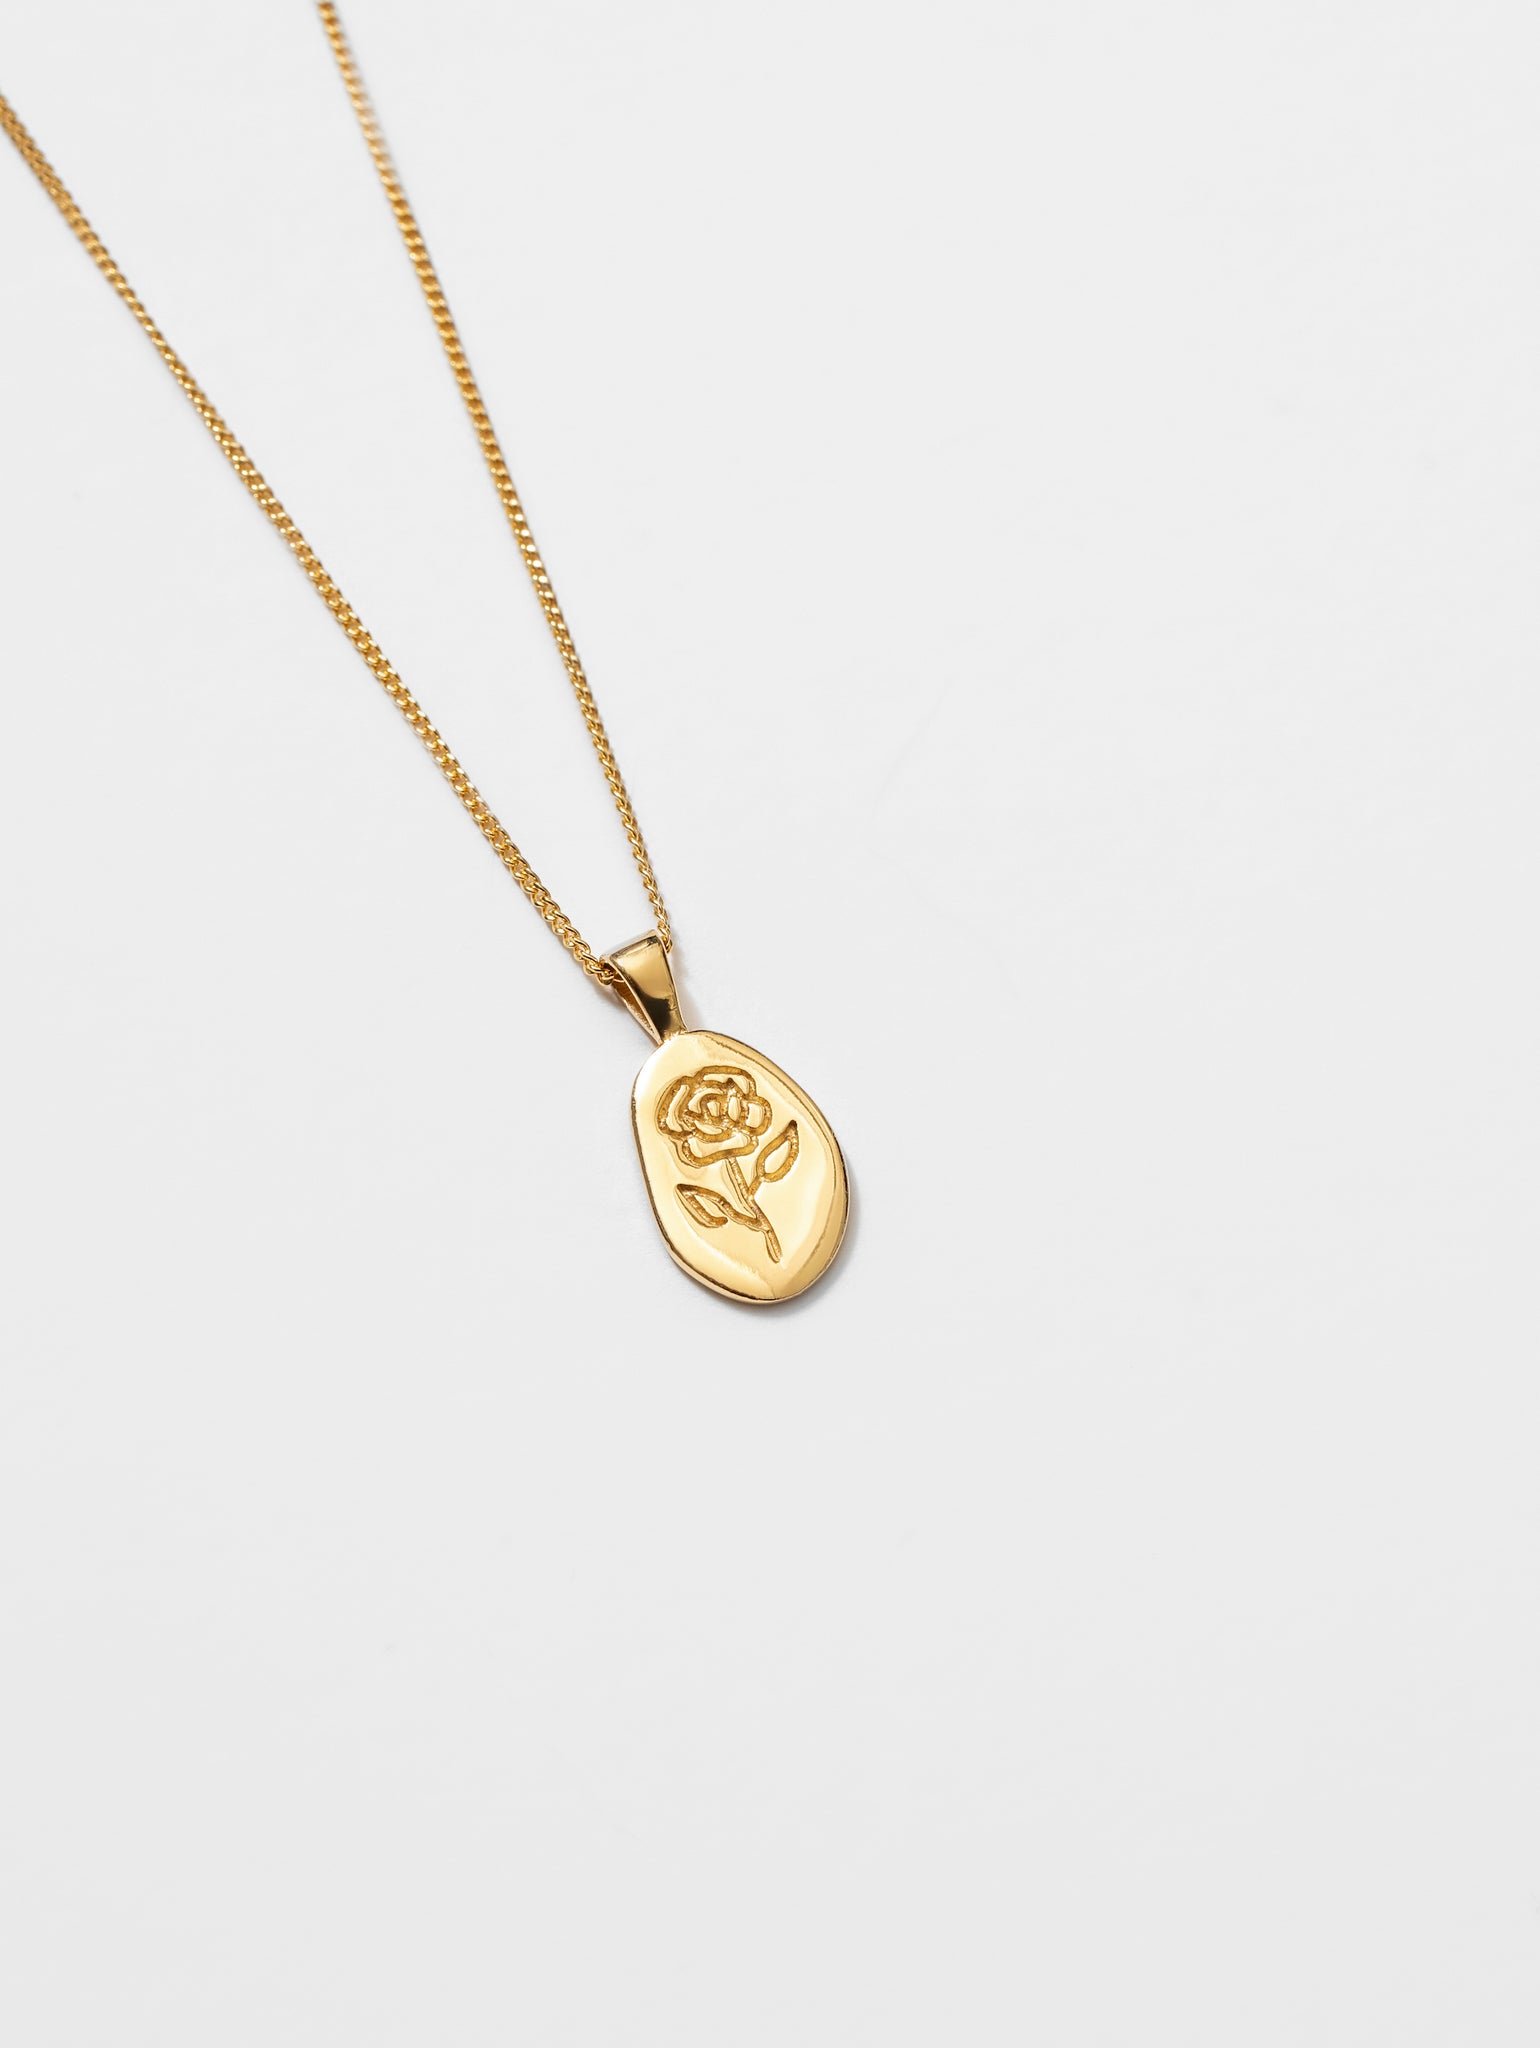 Wolf Circus Engraved Rose Pendant Necklace in 14k Gold Plated | Recycled Metals-Necklaces-wolfcircus.com